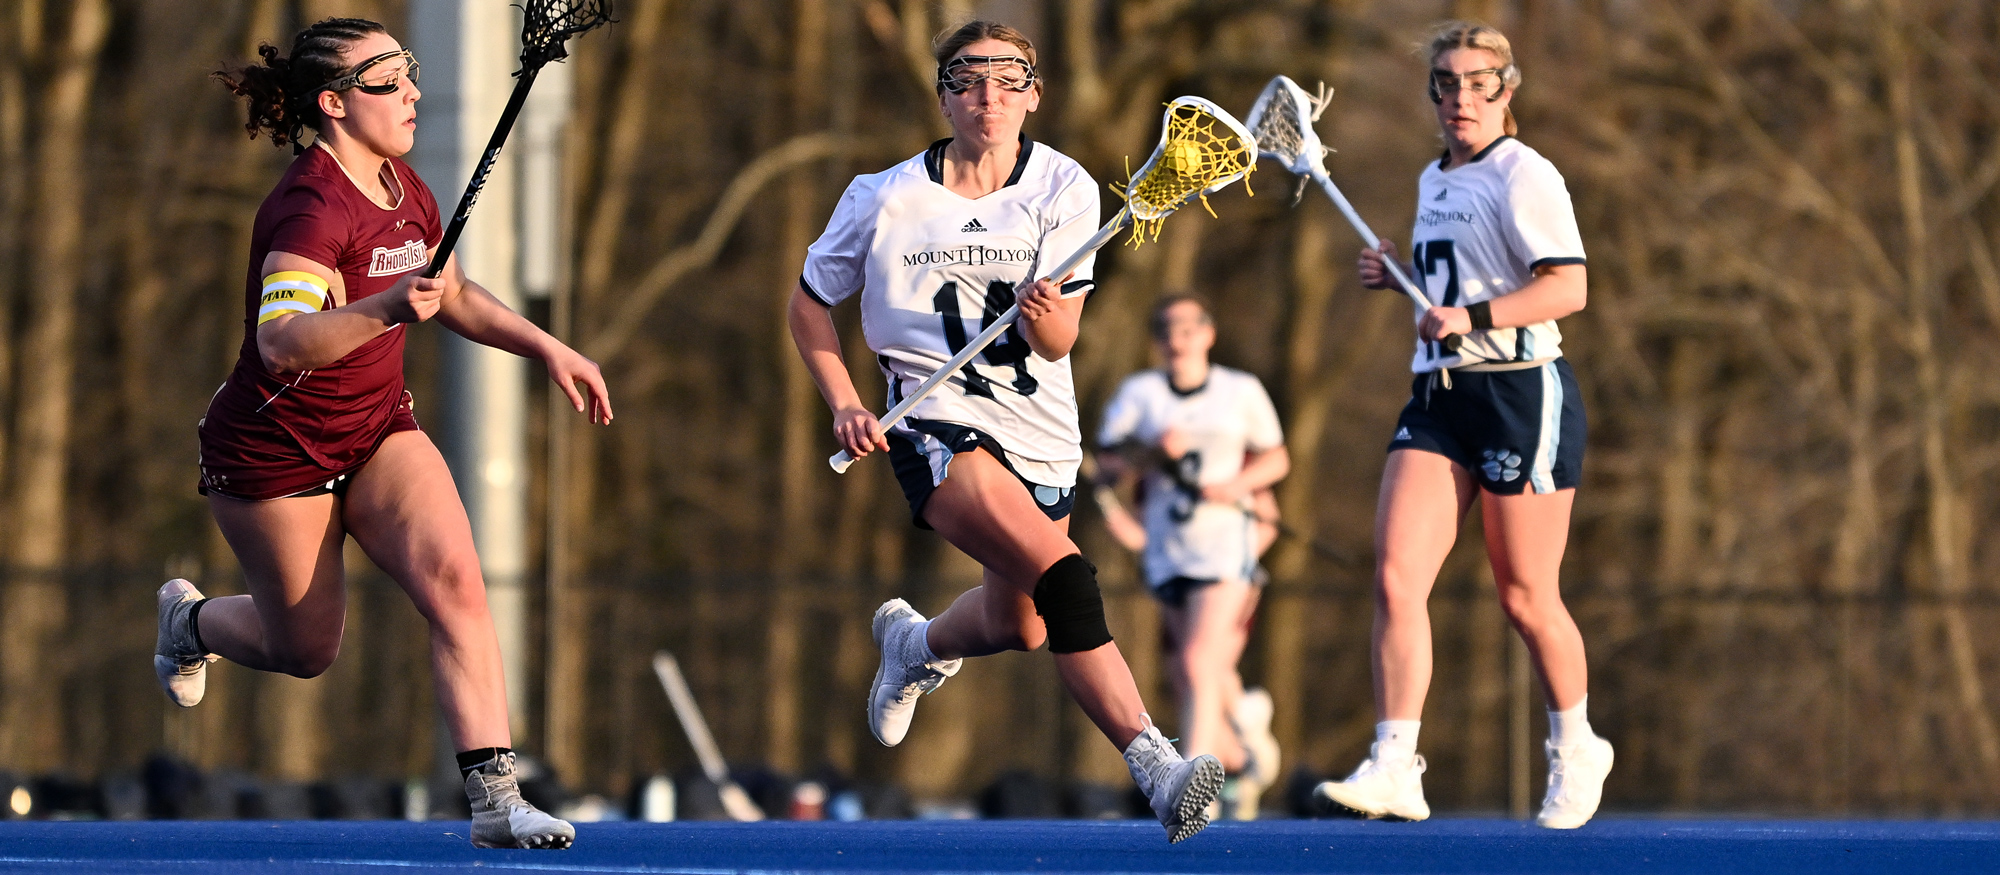 Emi Bisson scored a game-high four goals in Mount Holyoke's 18-8 loss to Smith on April 12, 2023. (RJB Sports file photo)